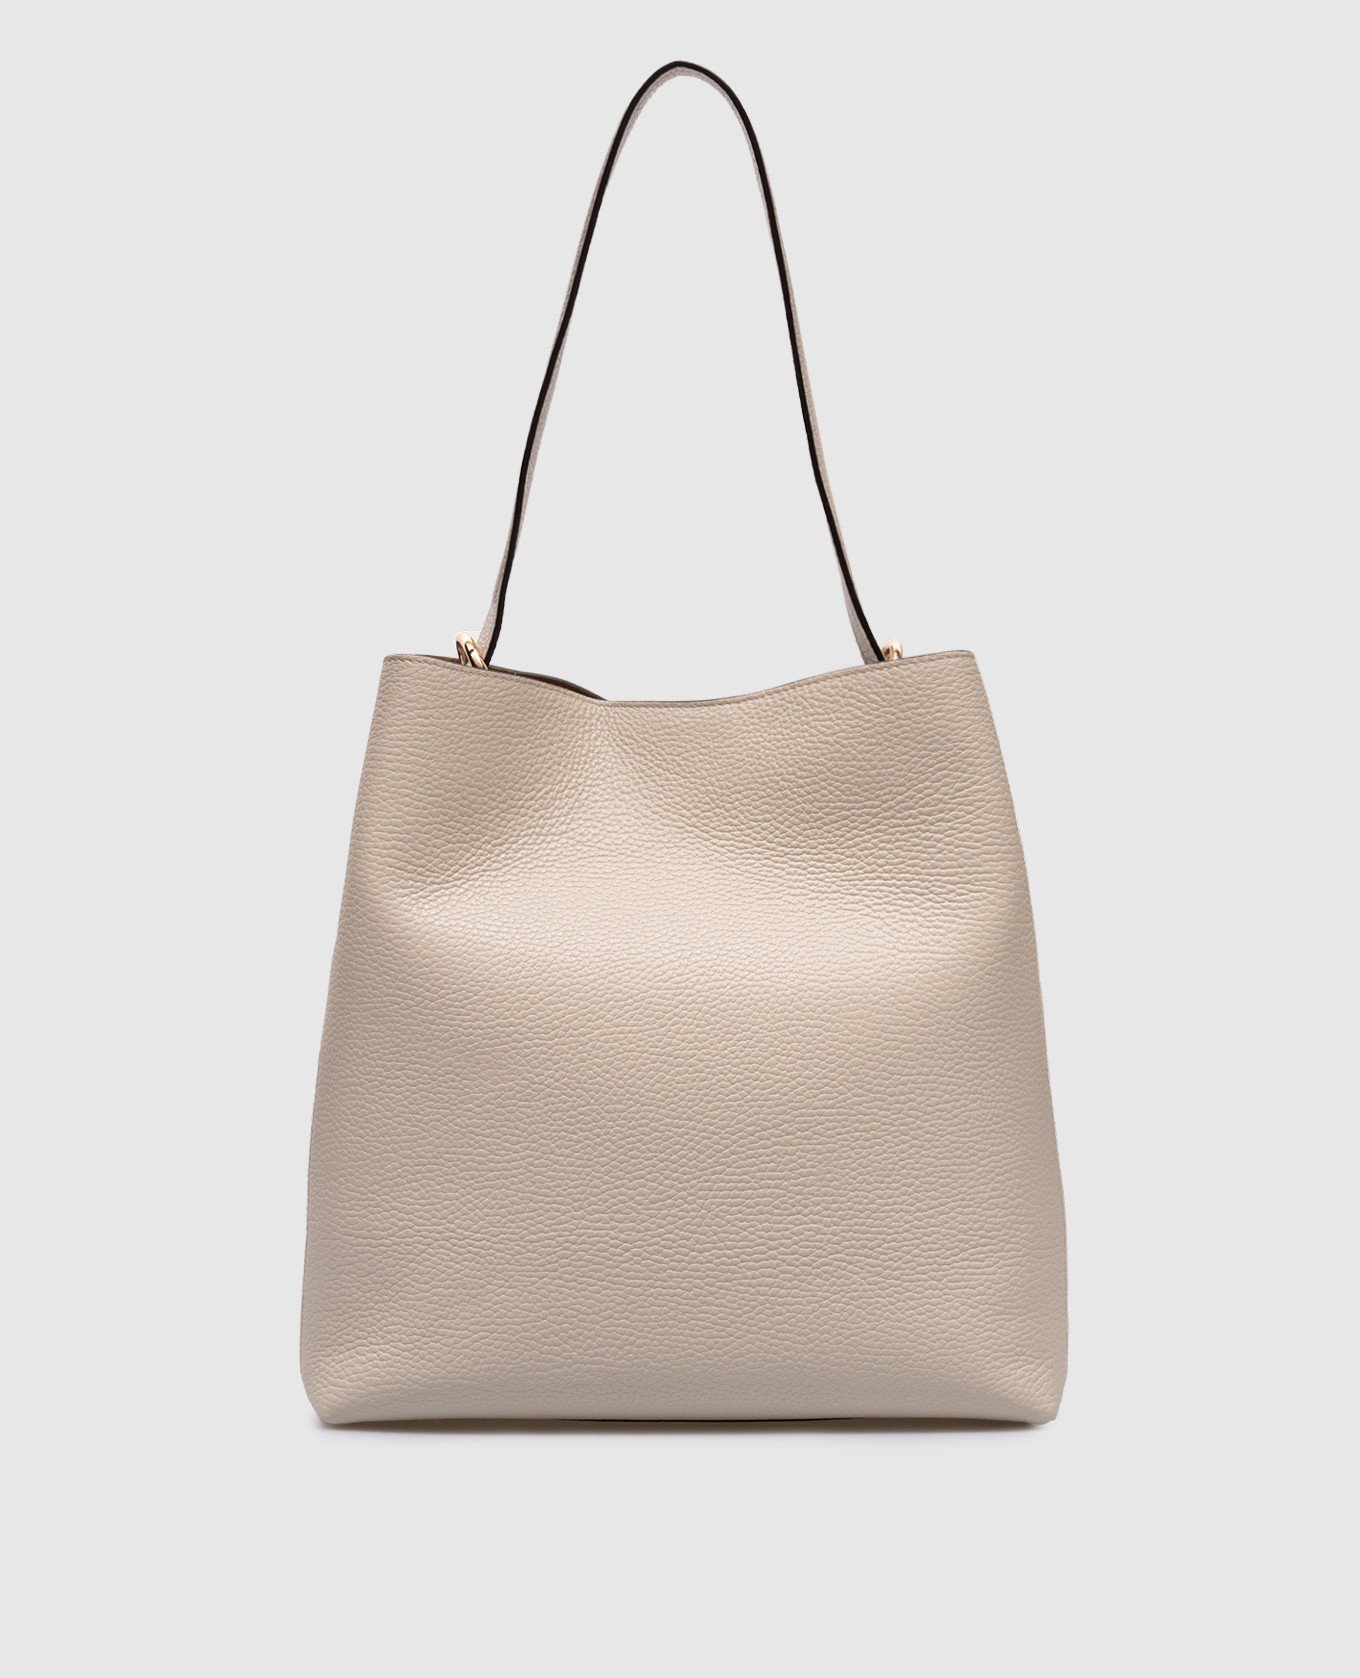 Beige leather bag with embossed grain